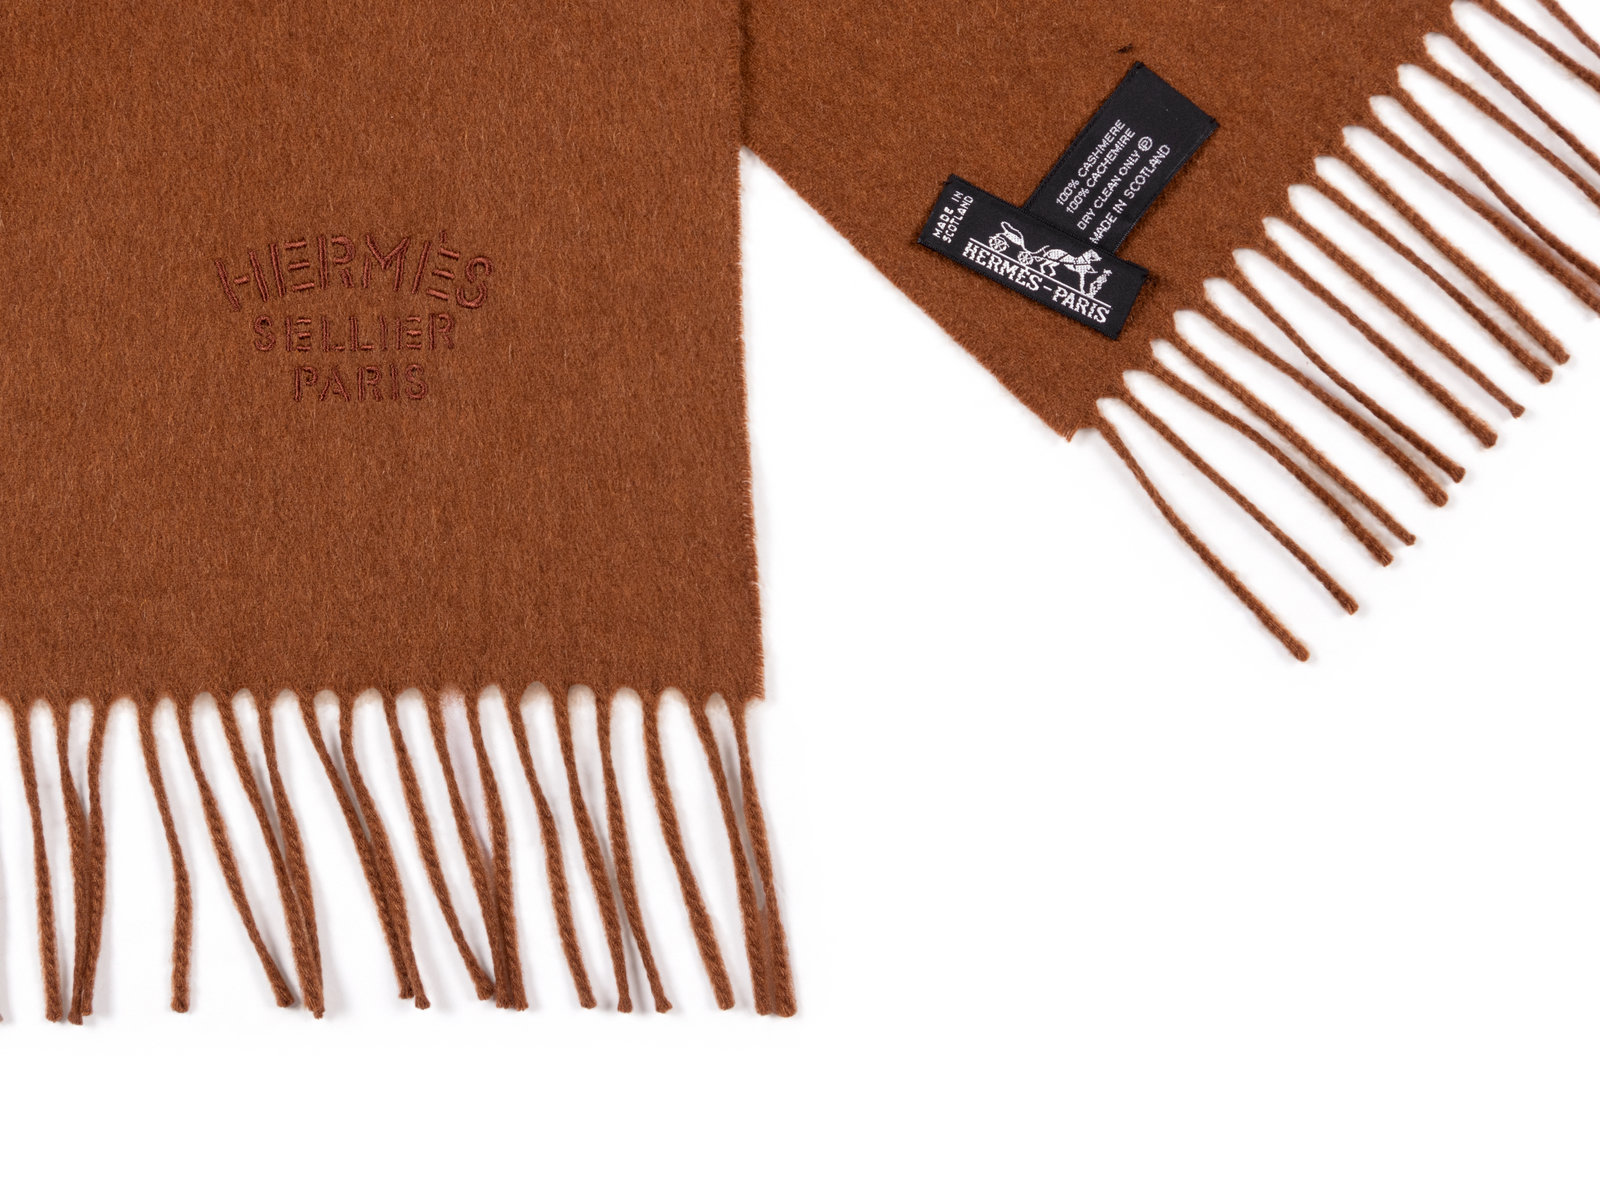 Sold at Auction: HERMES PARIS CASHMERE AND WOOL SCARF